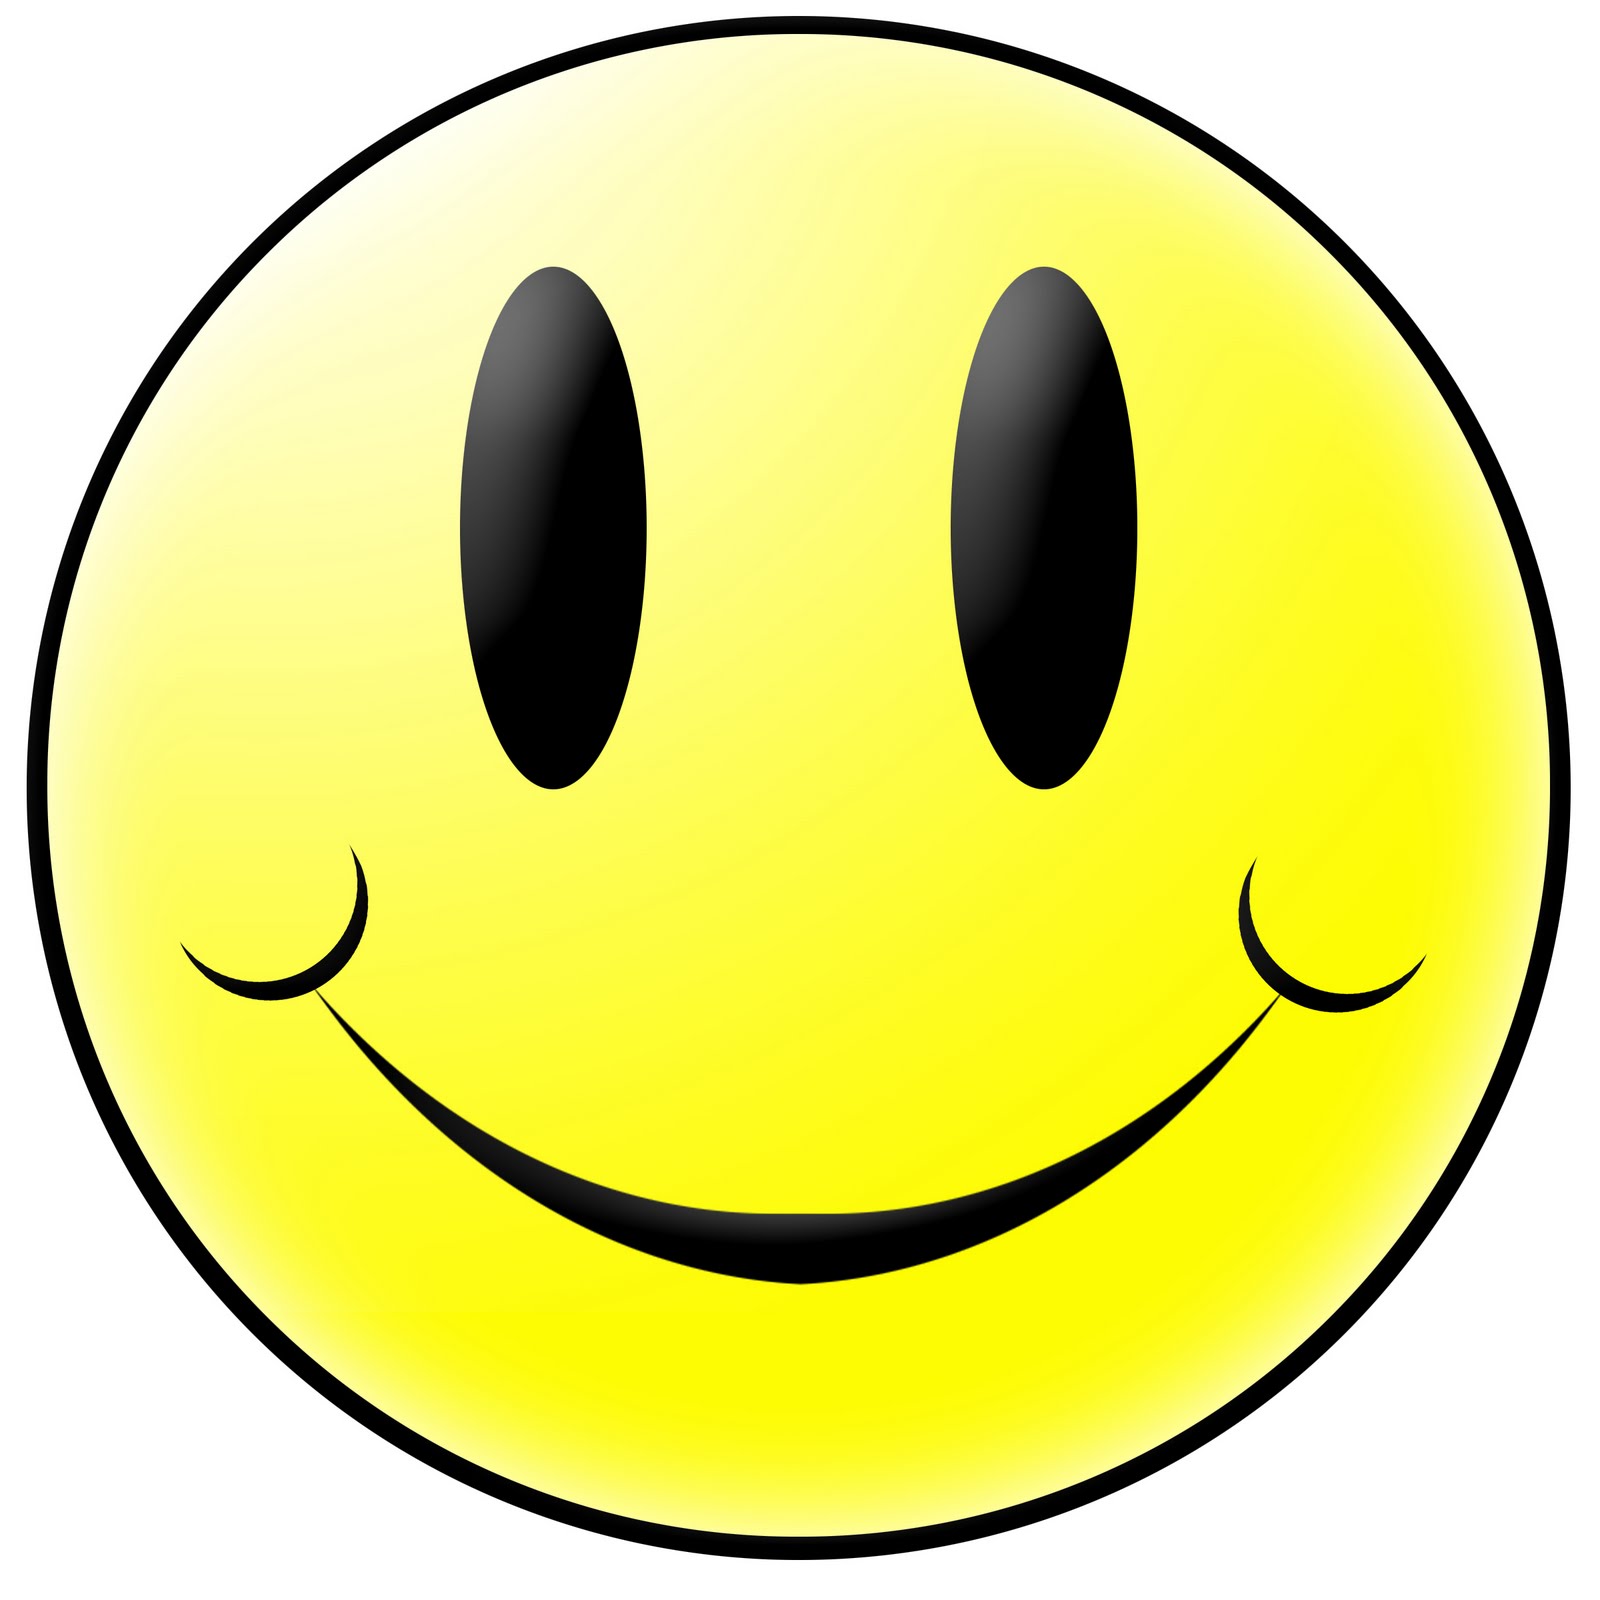 Funny Cartoon Smiley Faces - ClipArt Best